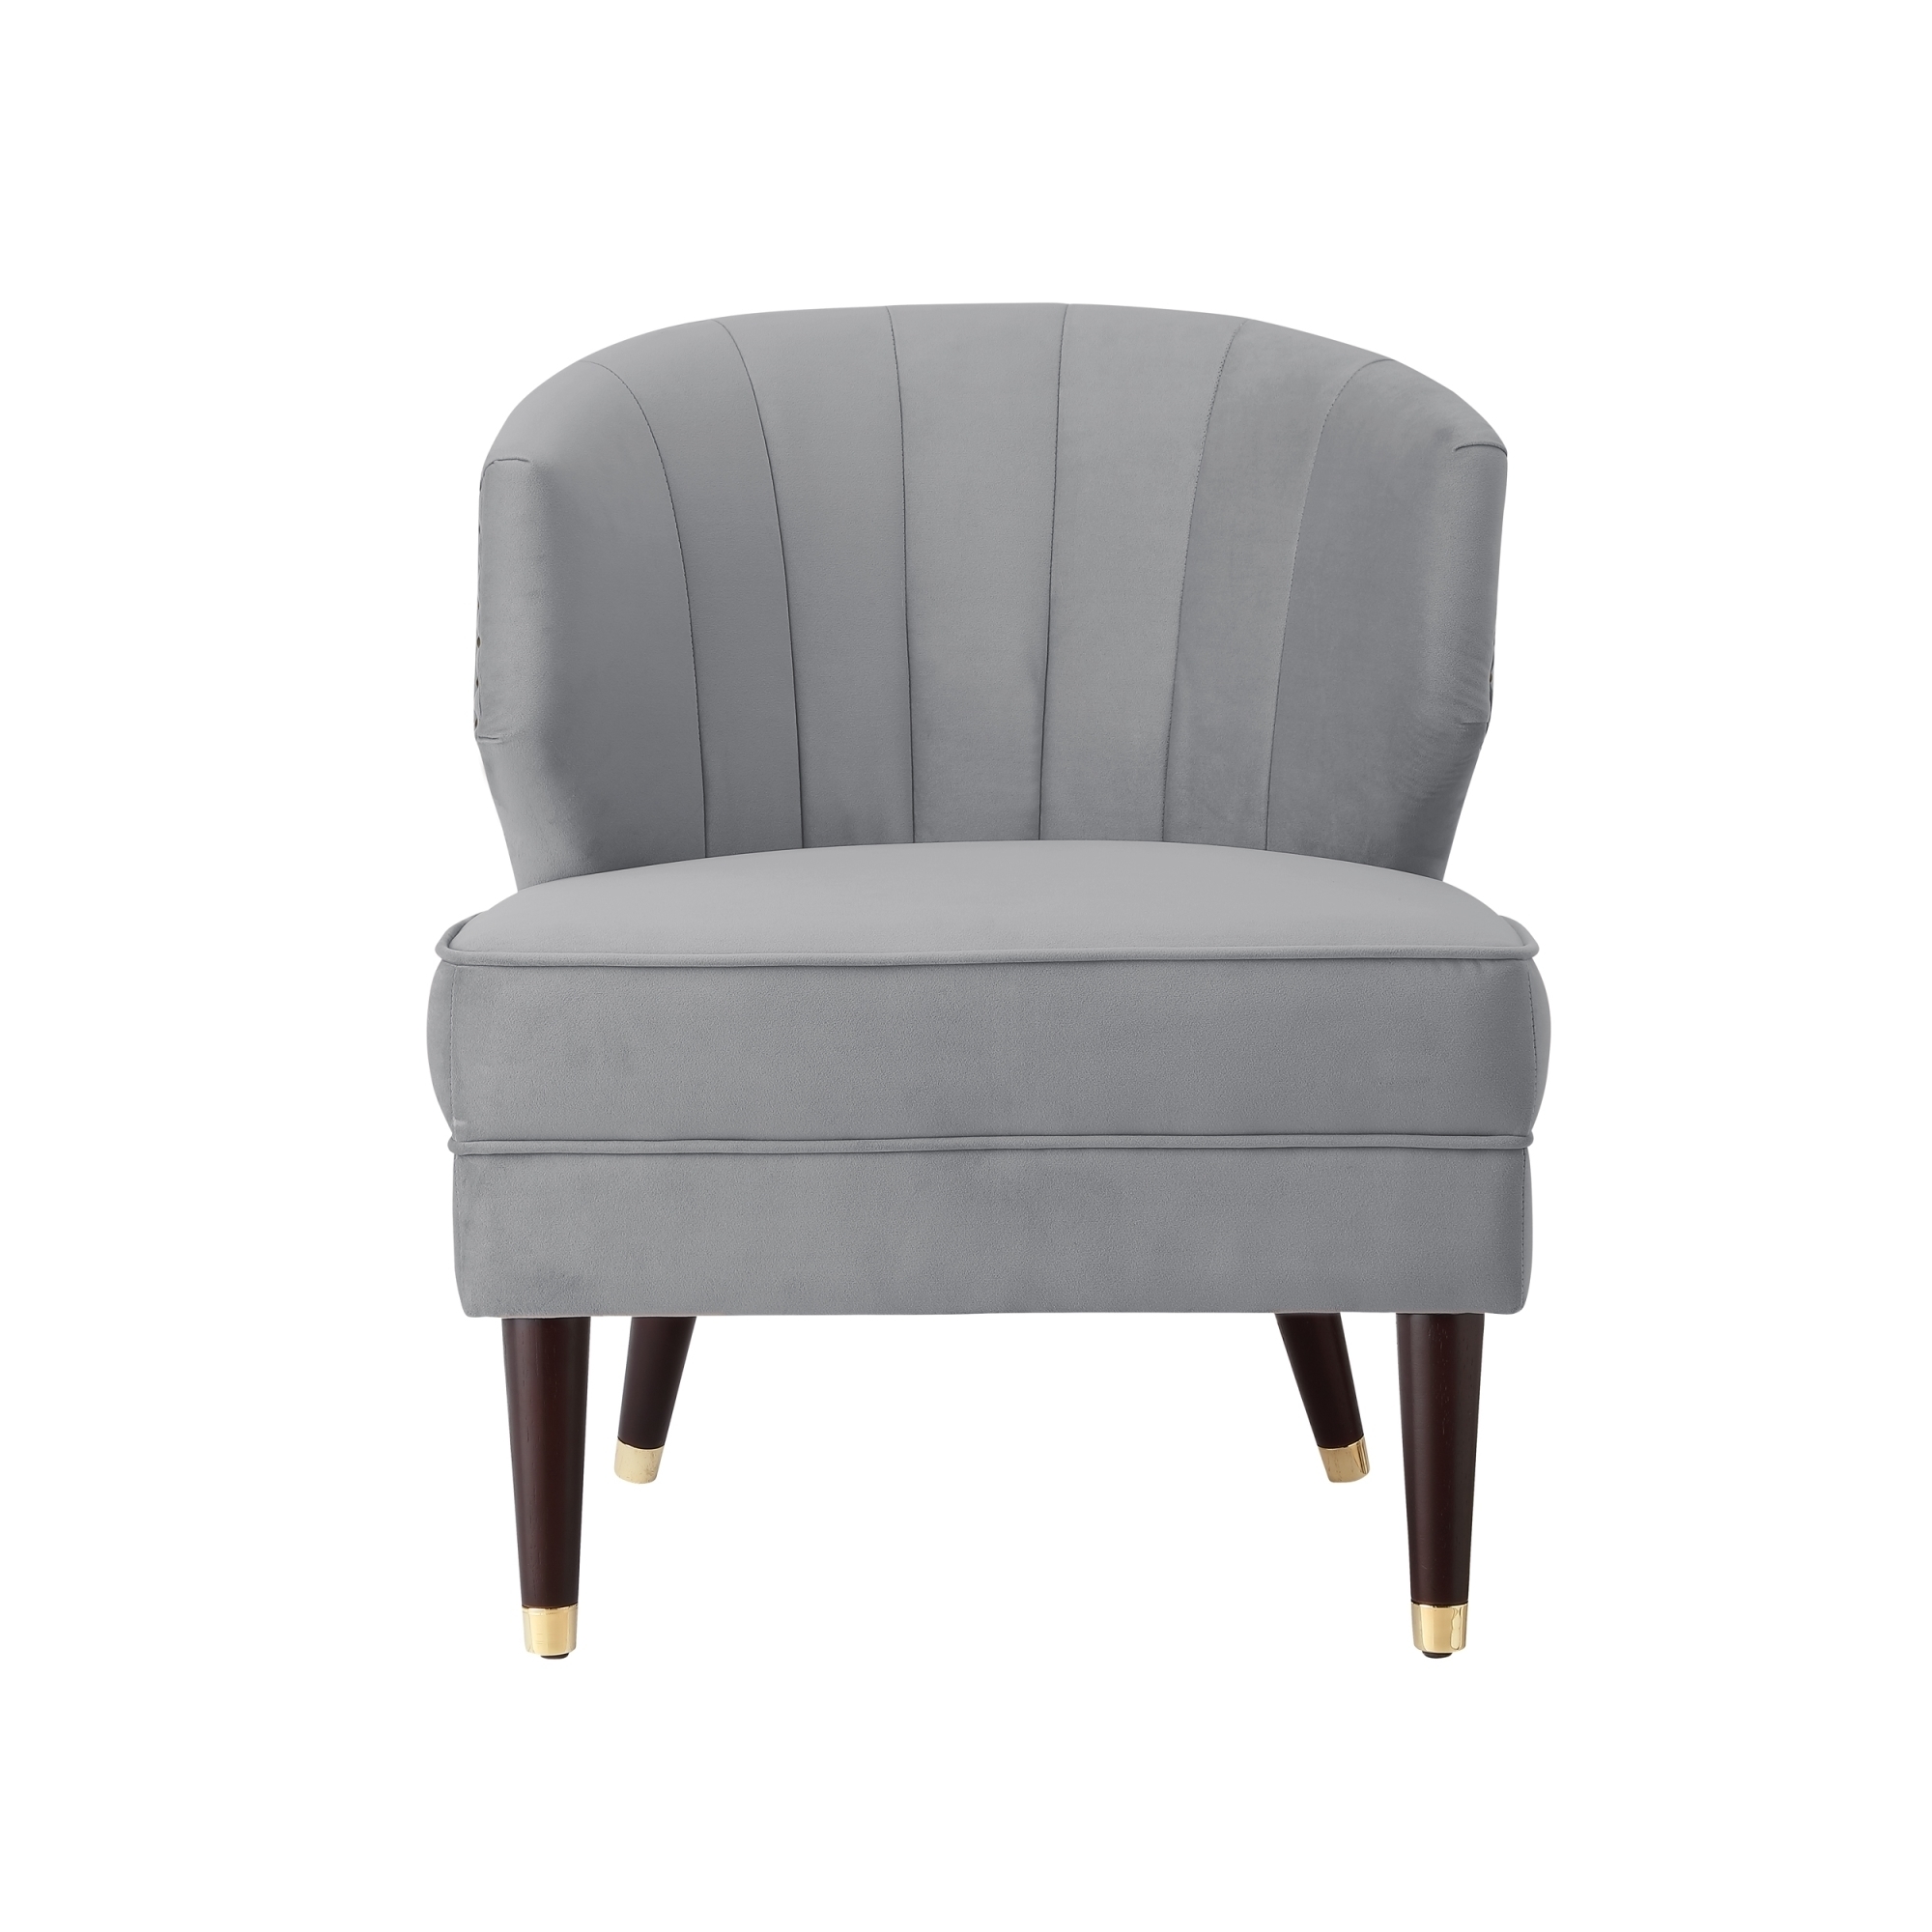 Nicole Miller Trung Velvet Accent Chair-Channel Tufted Back-Cherry Legs-Gold Metal Tip -Nailheads - Grey